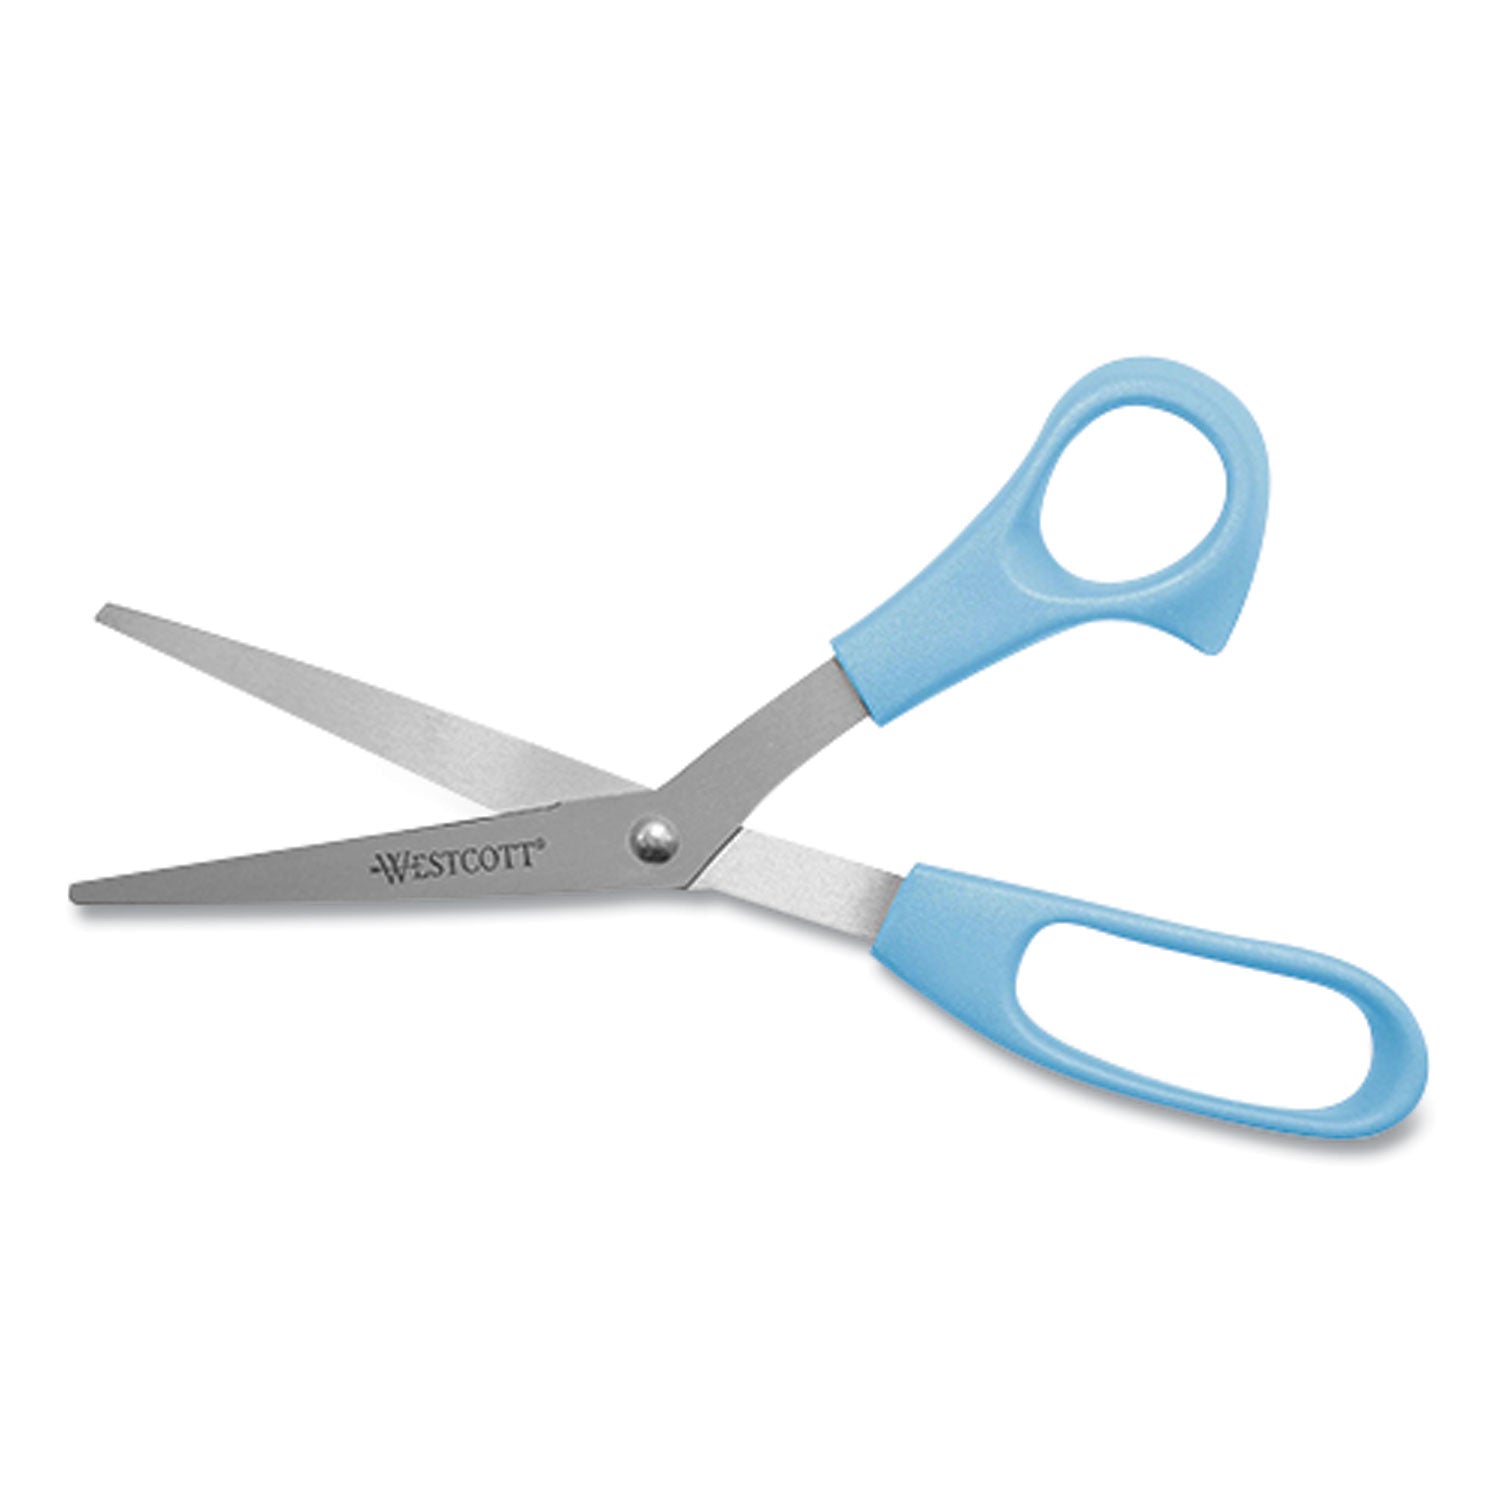 all-purpose-value-stainless-steel-scissors-three-pack-8-long-3-cut-length-assorted-color-offset-handles-3-pack_wtc13023 - 3